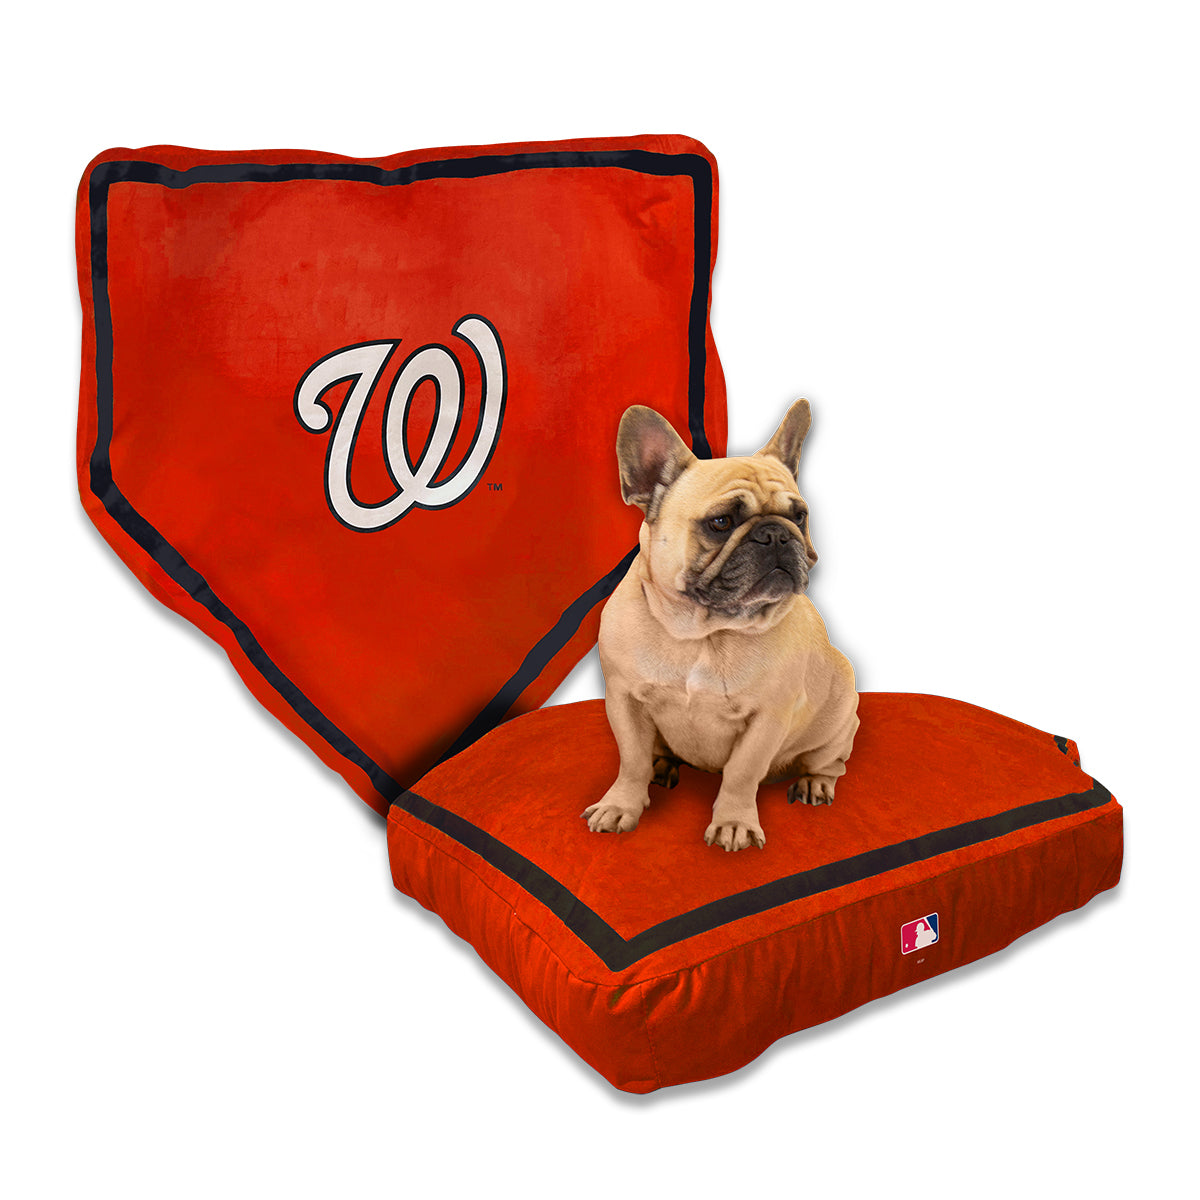 Washington Nationals Home Plate Bed by Nap Cap